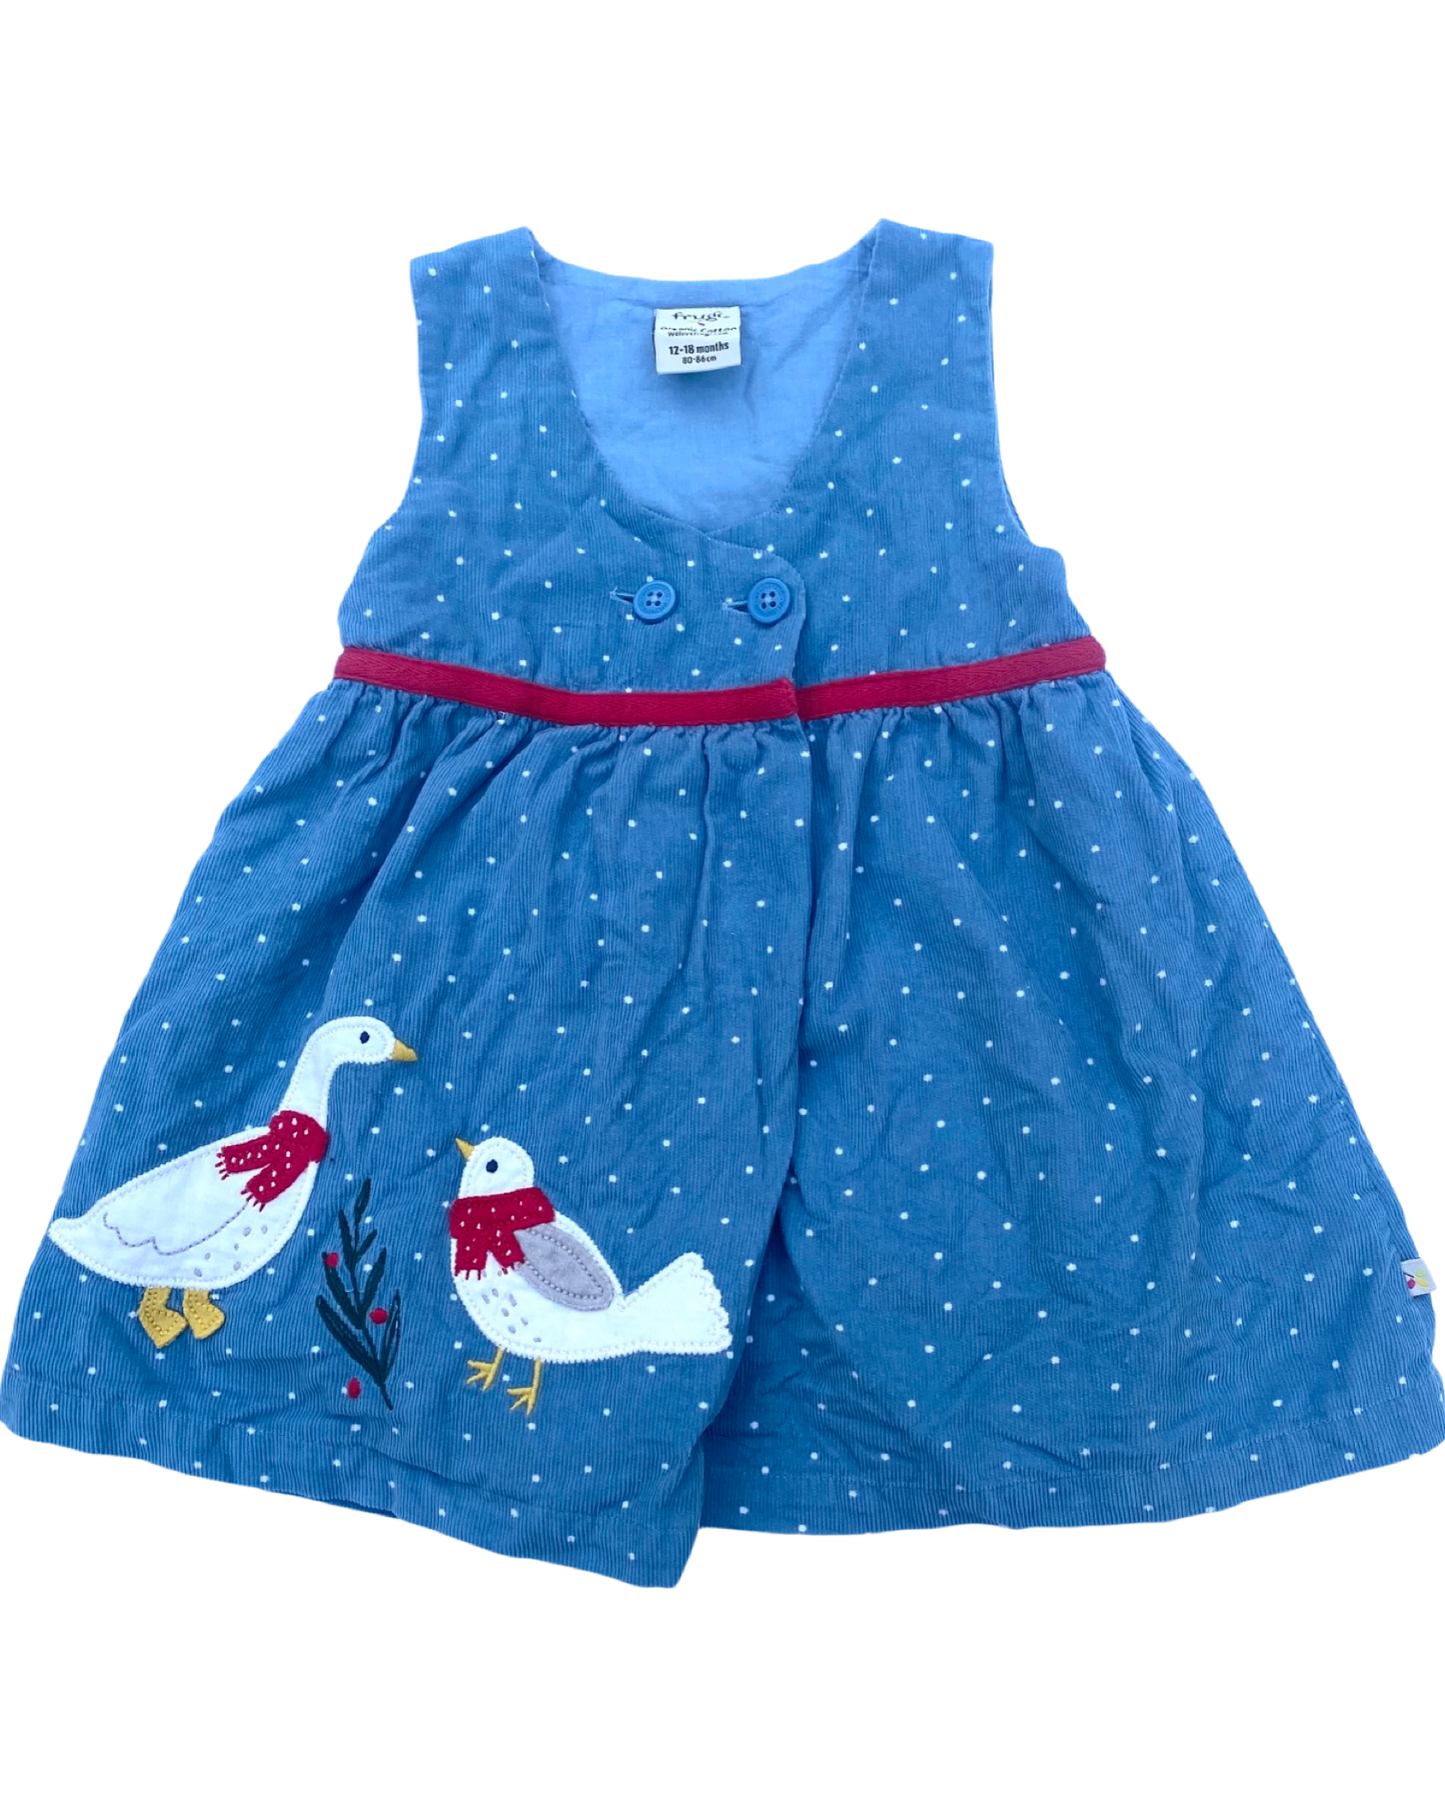 Frugi blue dotty needlecord dress with geese appliqué (size 12-18mths)